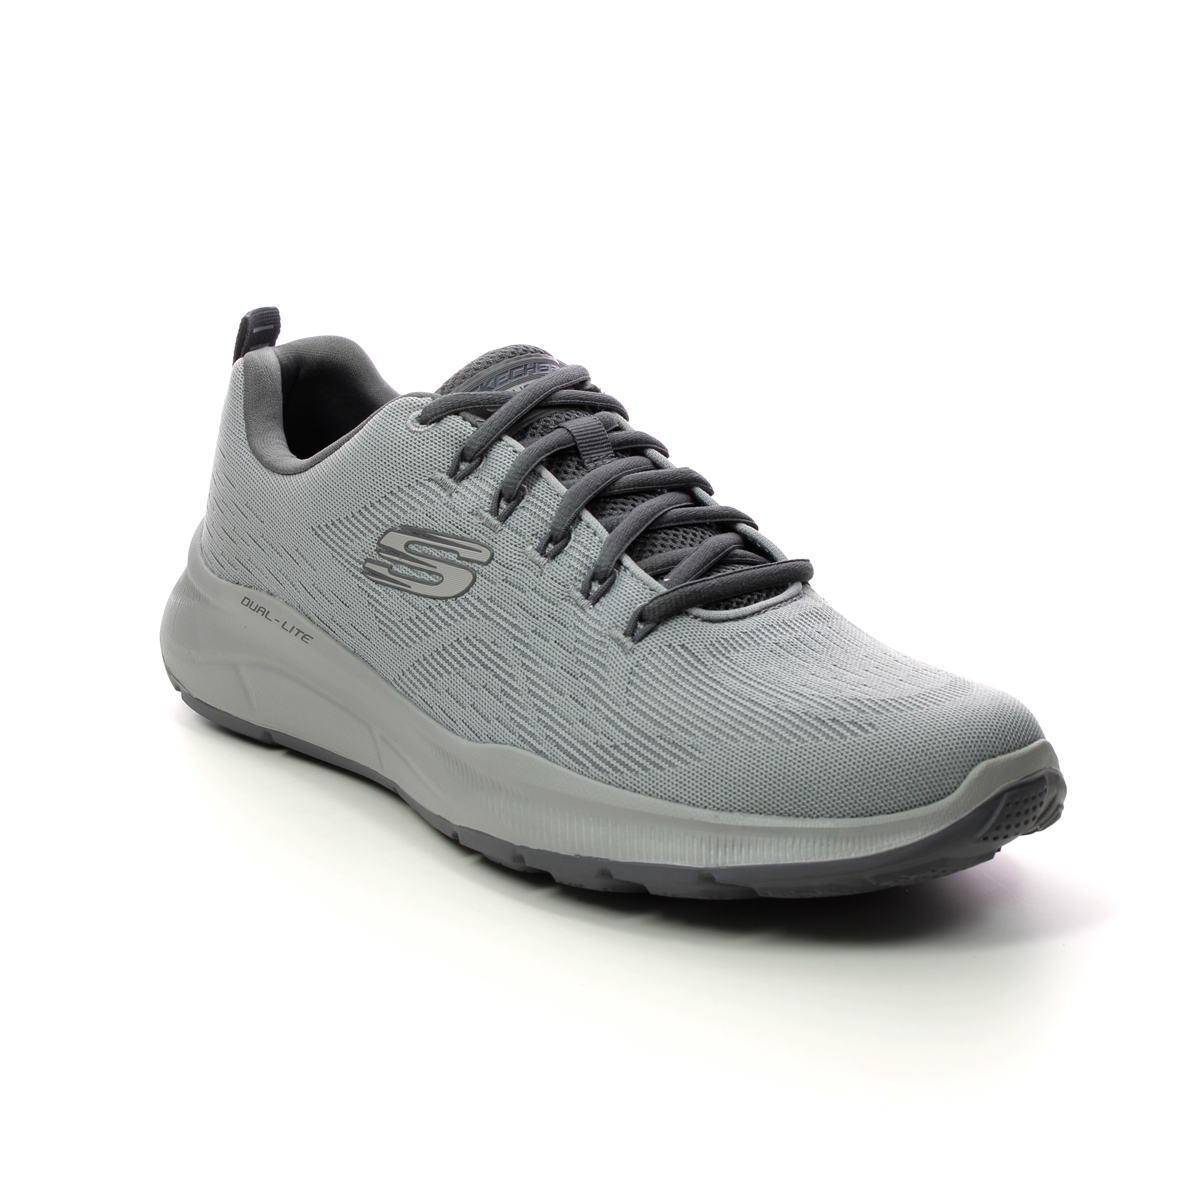 Skechers Equalizer 5 Grey Charcoal Mens Trainers 232519 In Size 7 In Plain Grey Charcoal